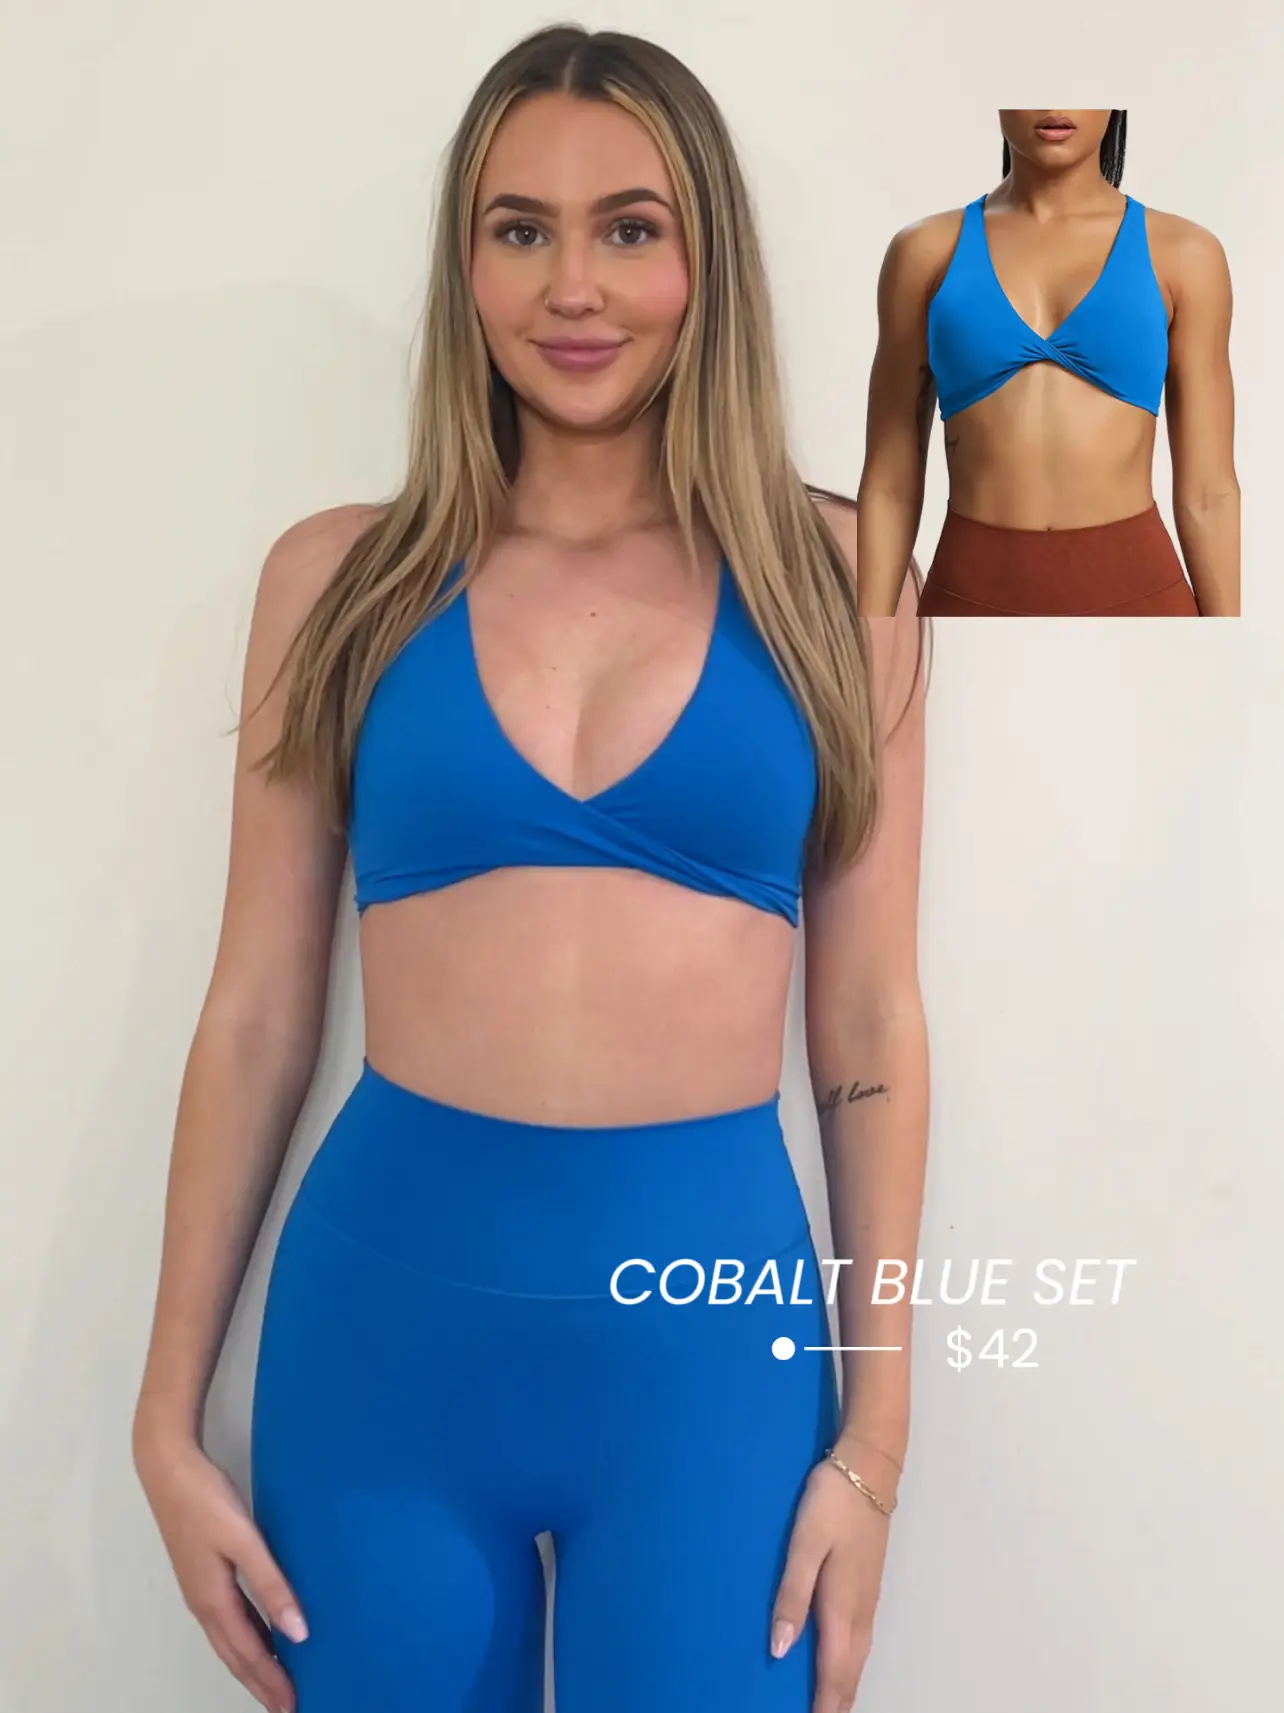 ACTIVE TRY ON HAUL!!  Gallery posted by Laurel Goldman